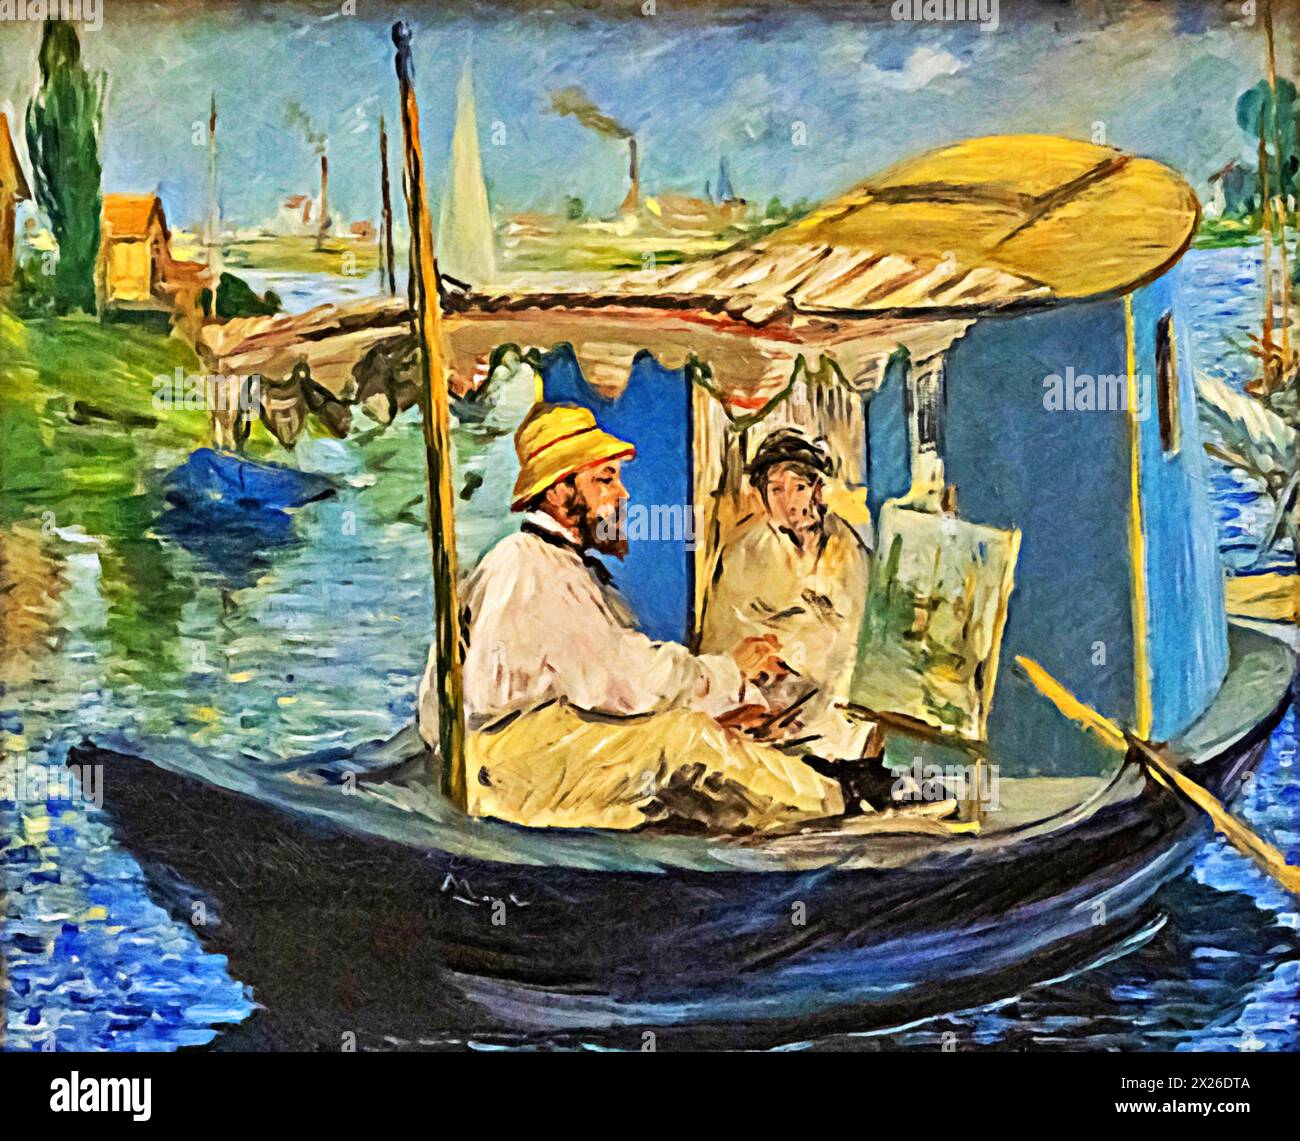 Monet in his Floating Studio, 1874 (Painting) by Artist Manet, Edouard (1832-83) French. Stock Vector